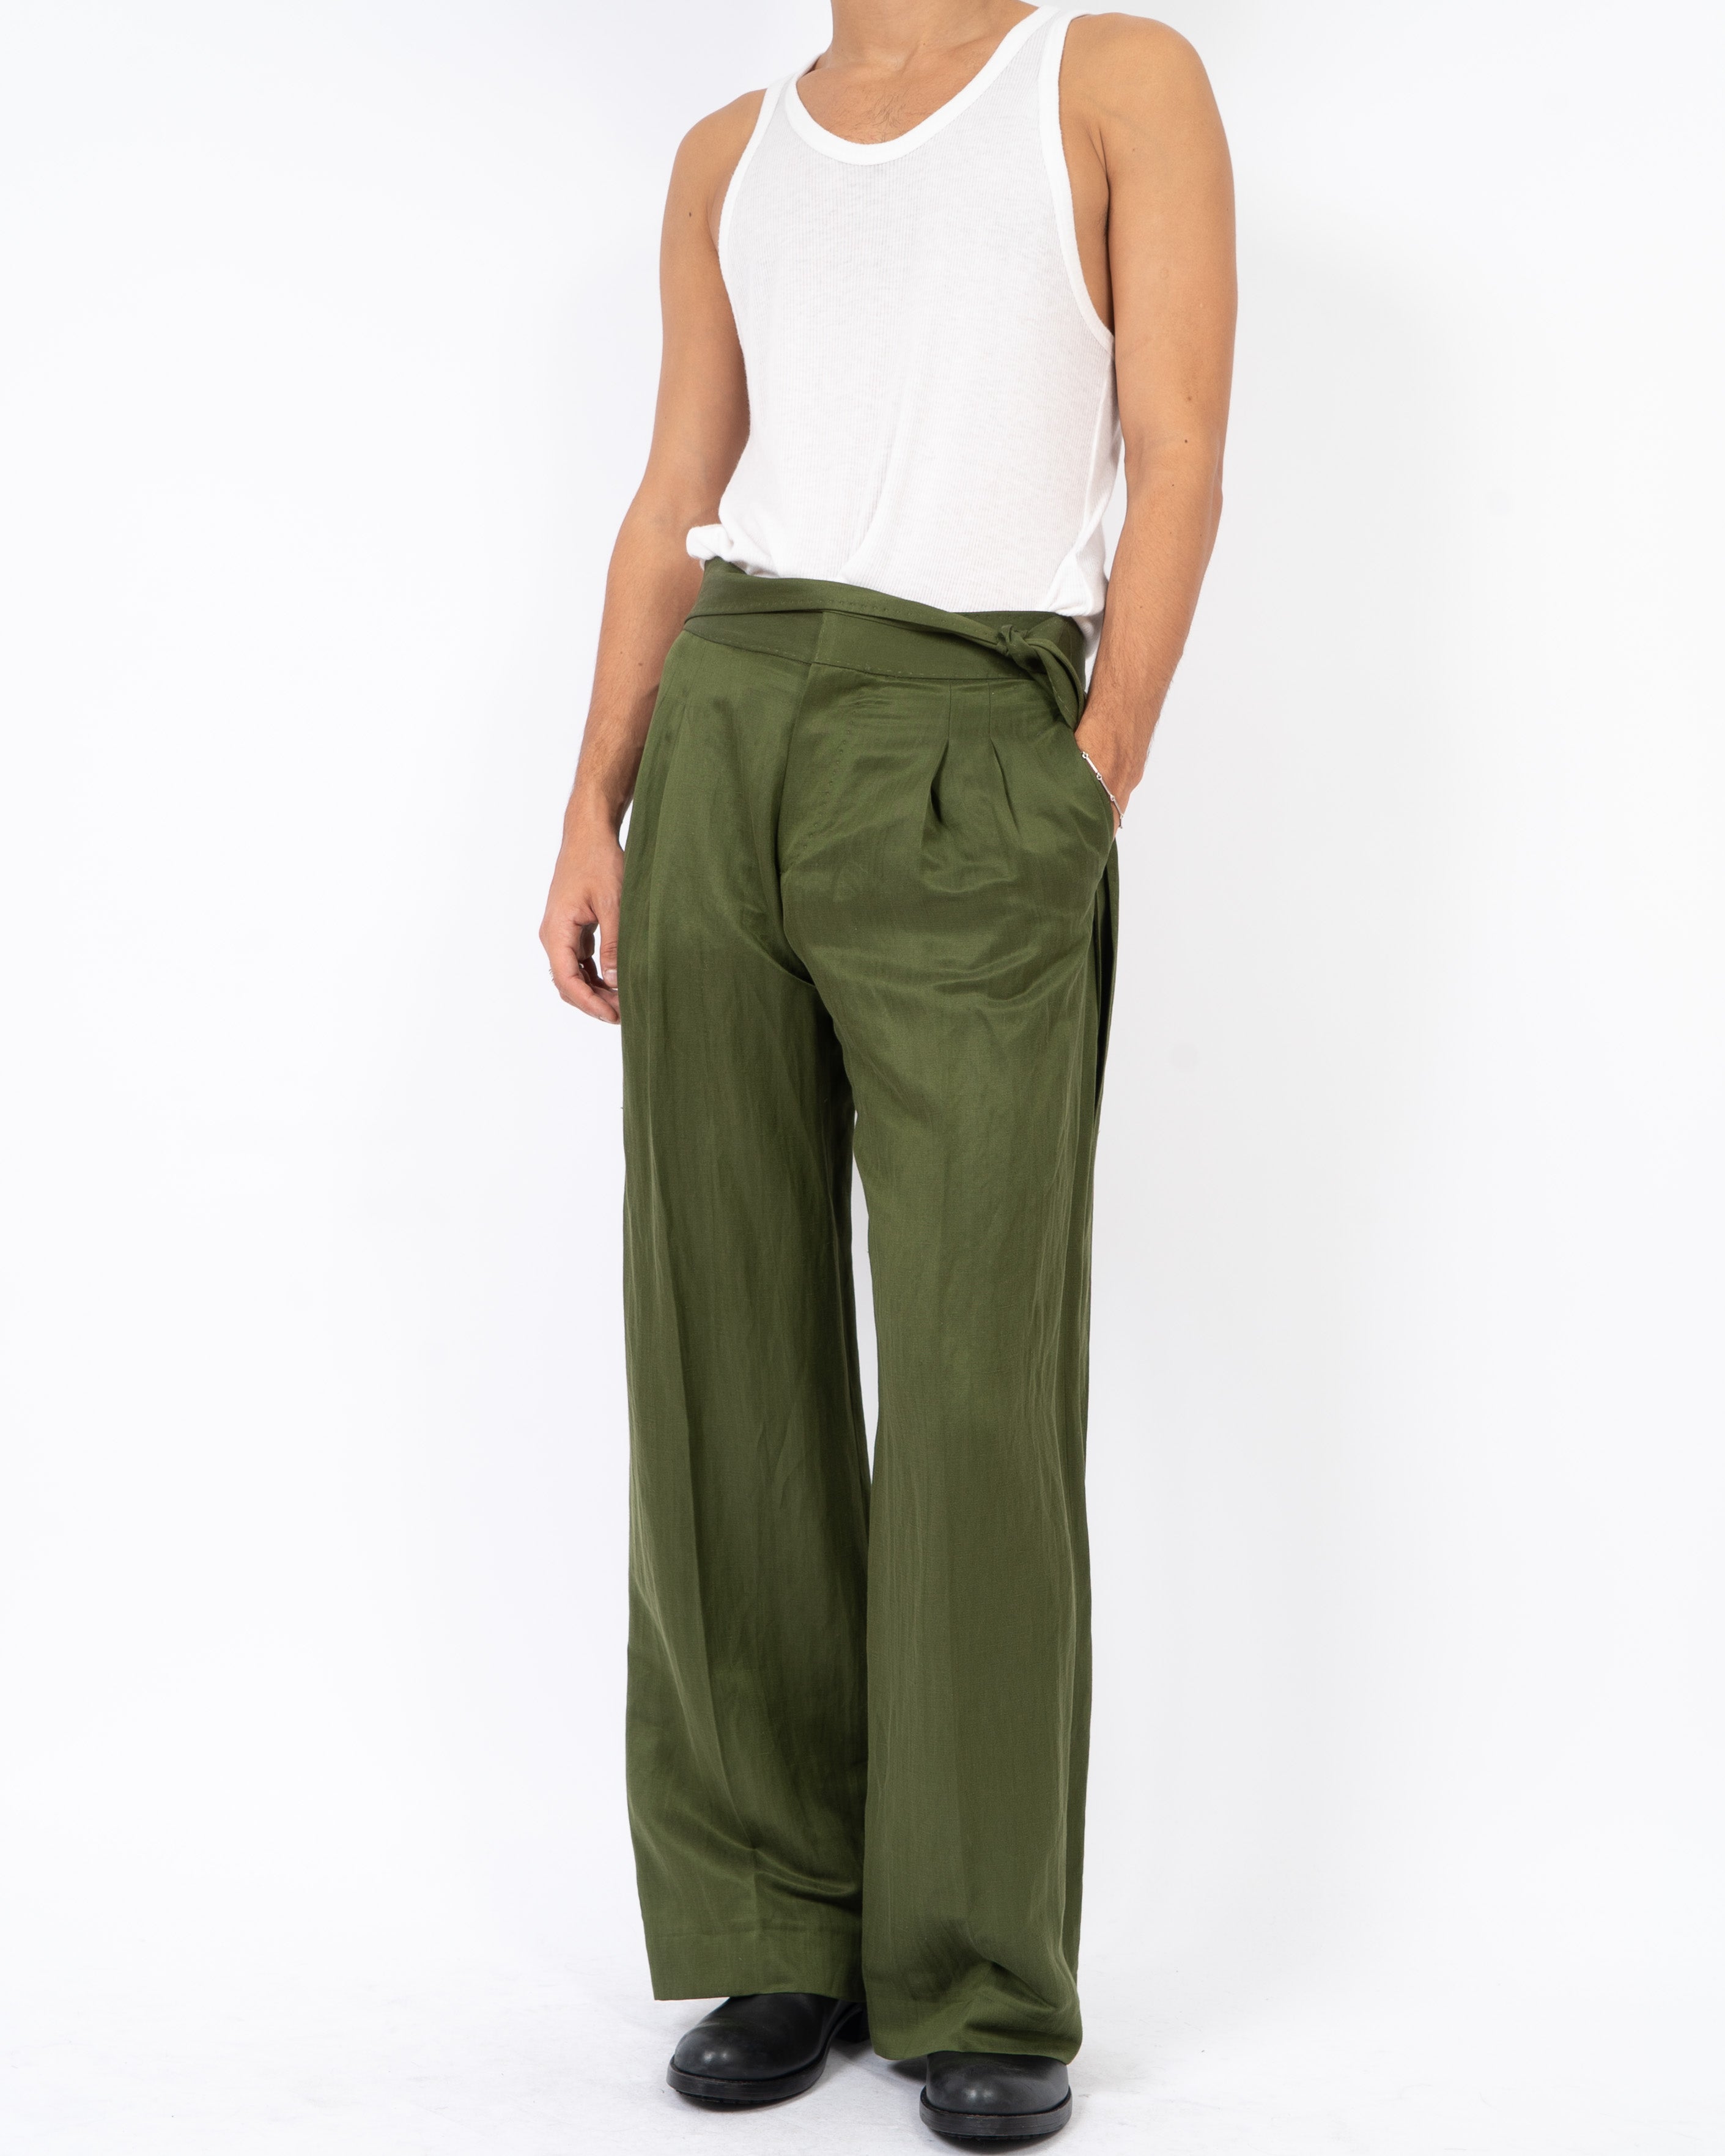 SS19 Belted Azul Khaki Trousers Sample